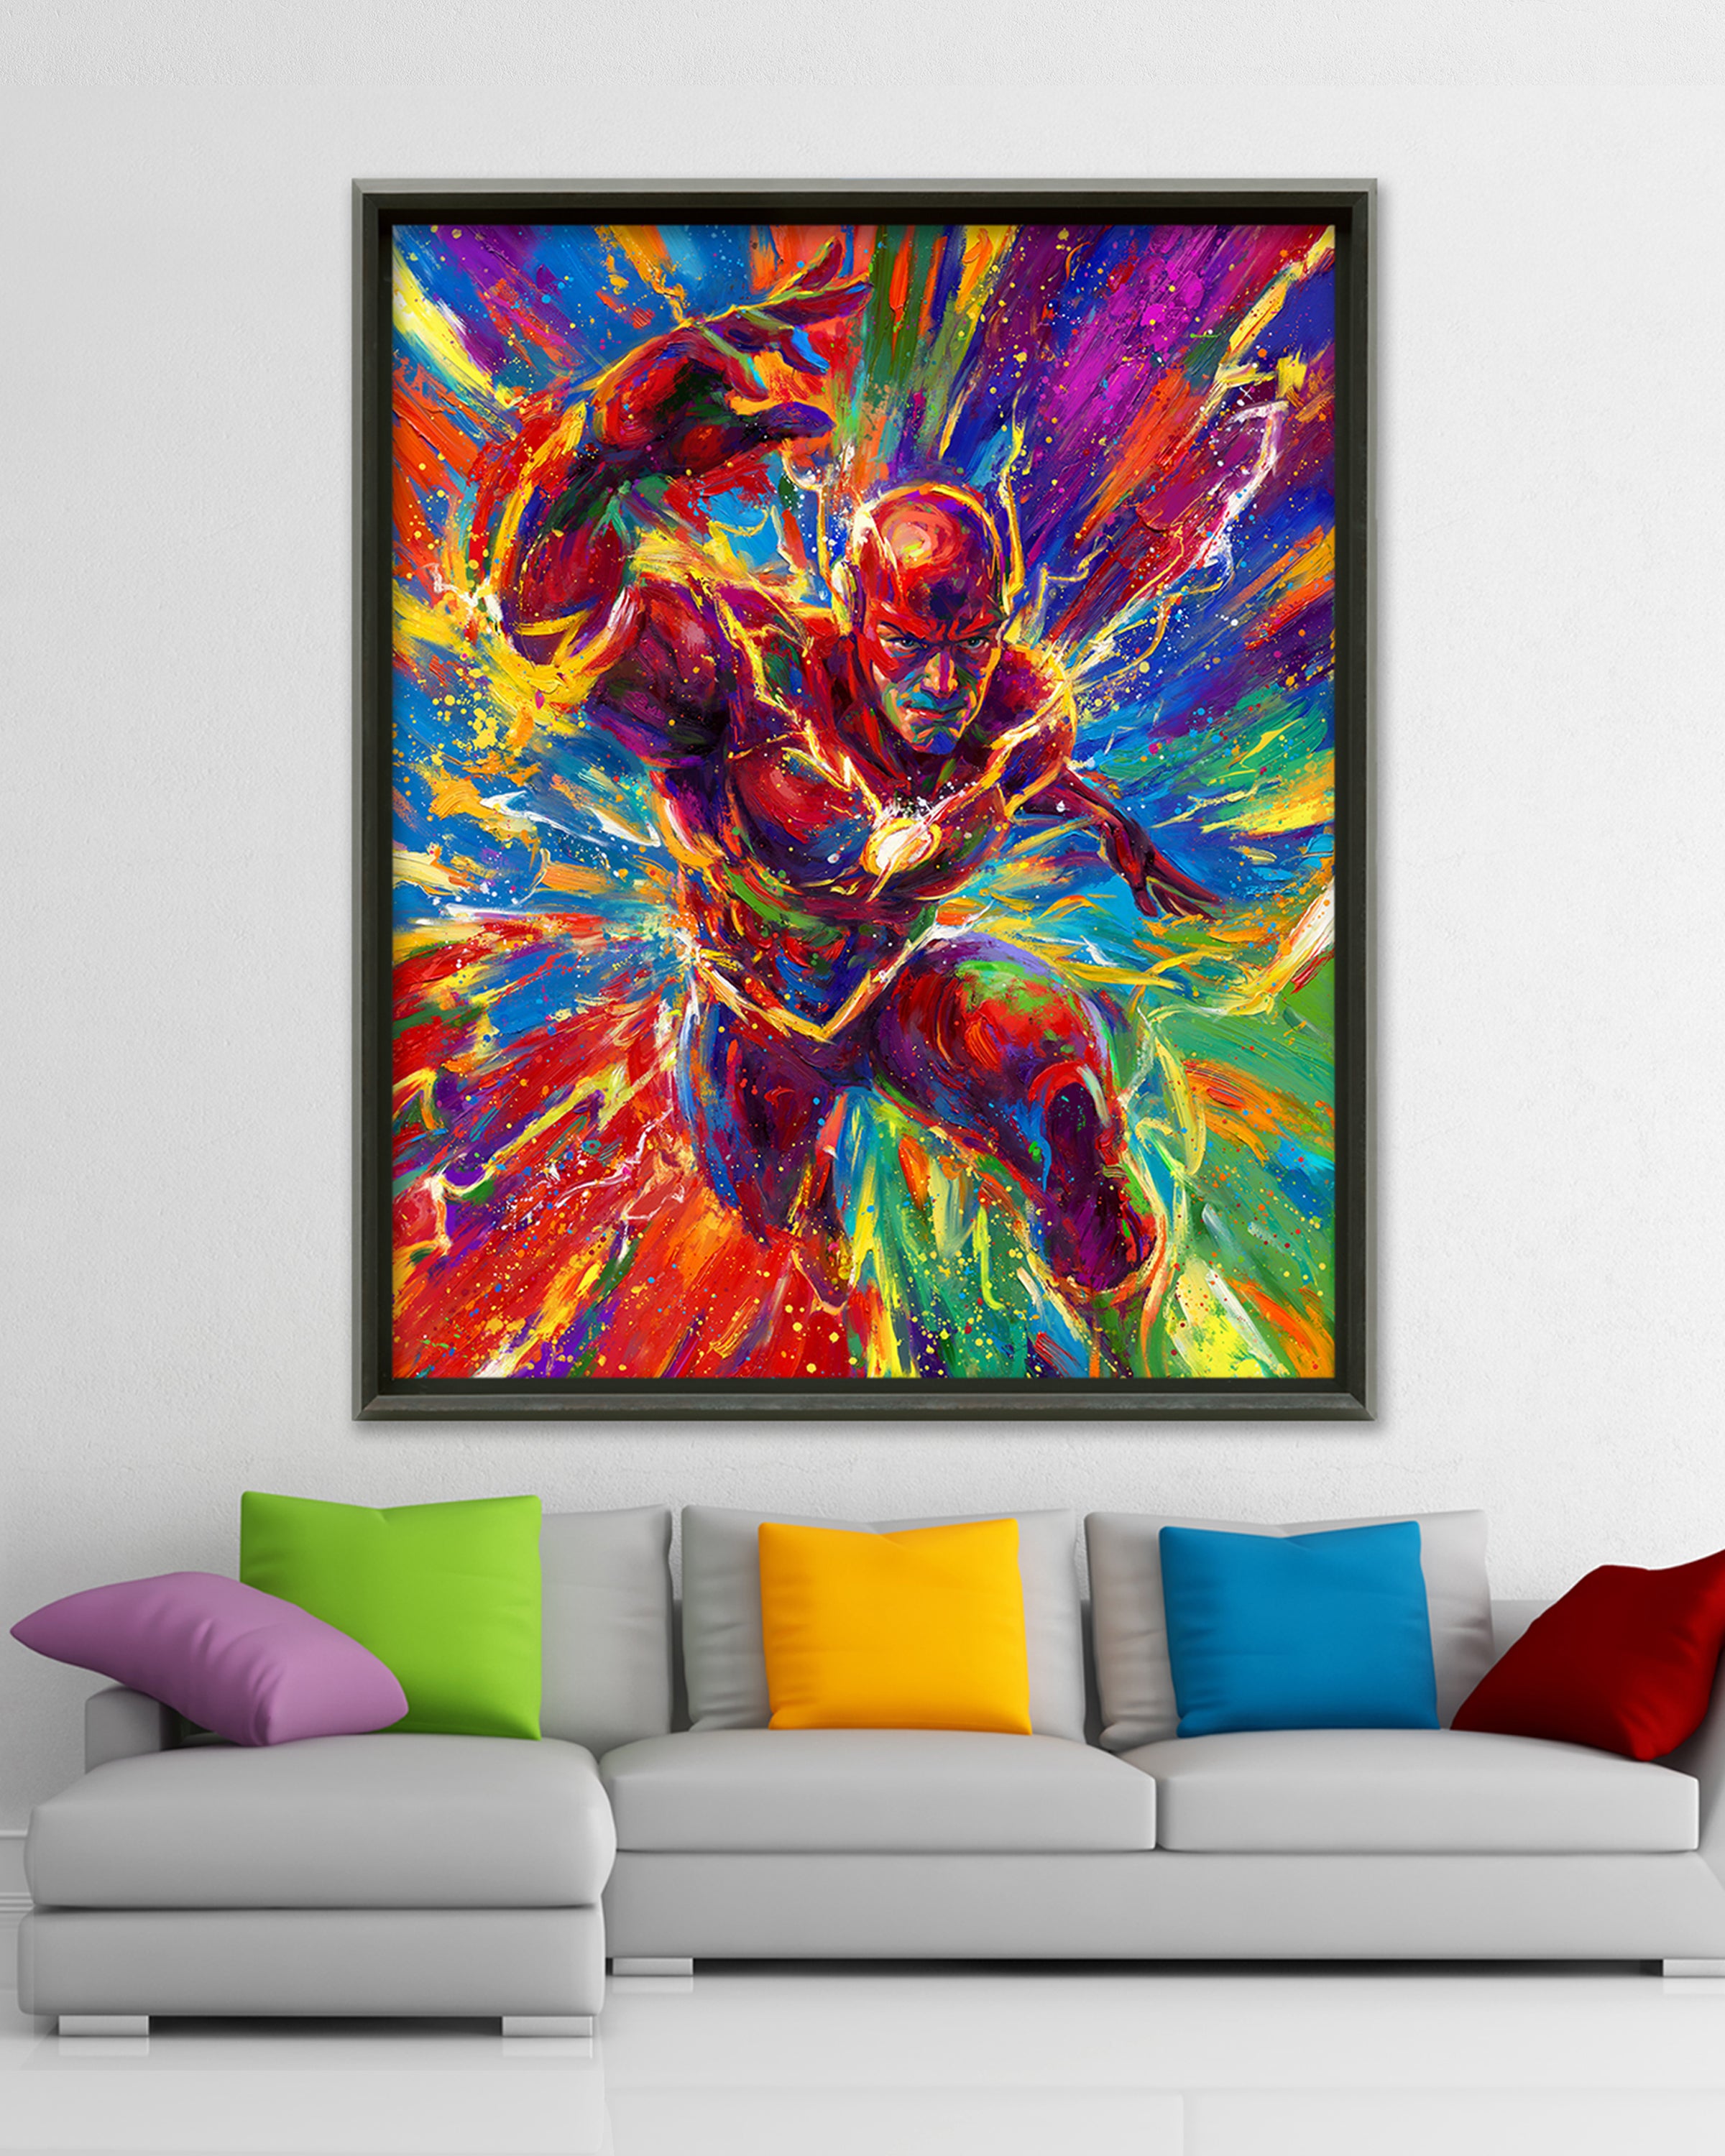 Oil on canvas original painting of The Flash, DC Comics Barry Allen, child of lightspeed and ultimate superhero of thinking moving and reacting at light speeds, painted in an array of blue red, purple and greens, and electrified yellow in colorful brushstrokes, color expressionism style in a room setting.